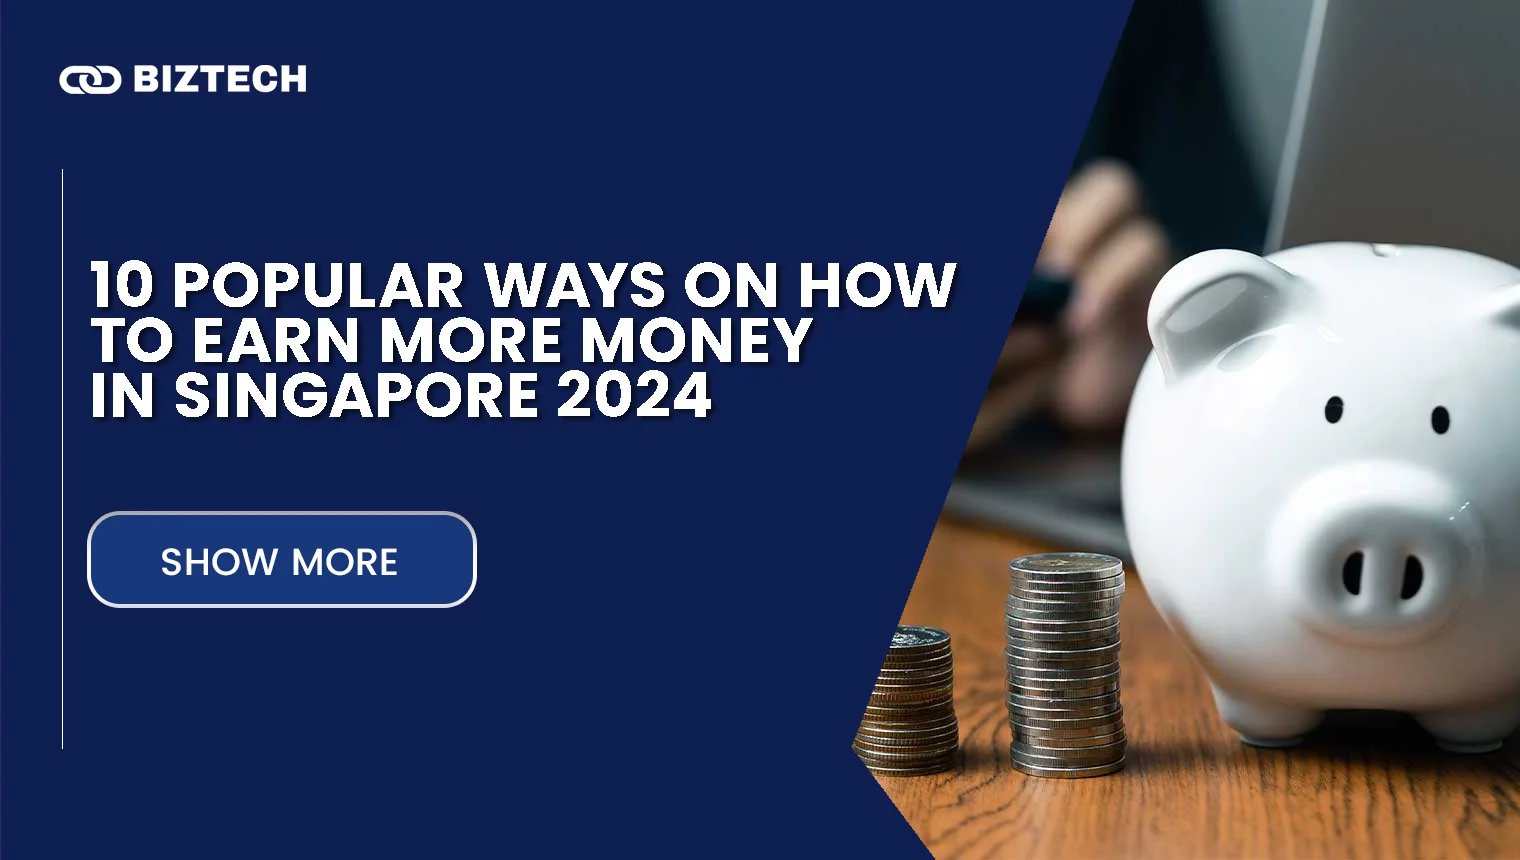 Here are 10 Side Hustles You Should Consider to Make More Money in Singapore for 2024